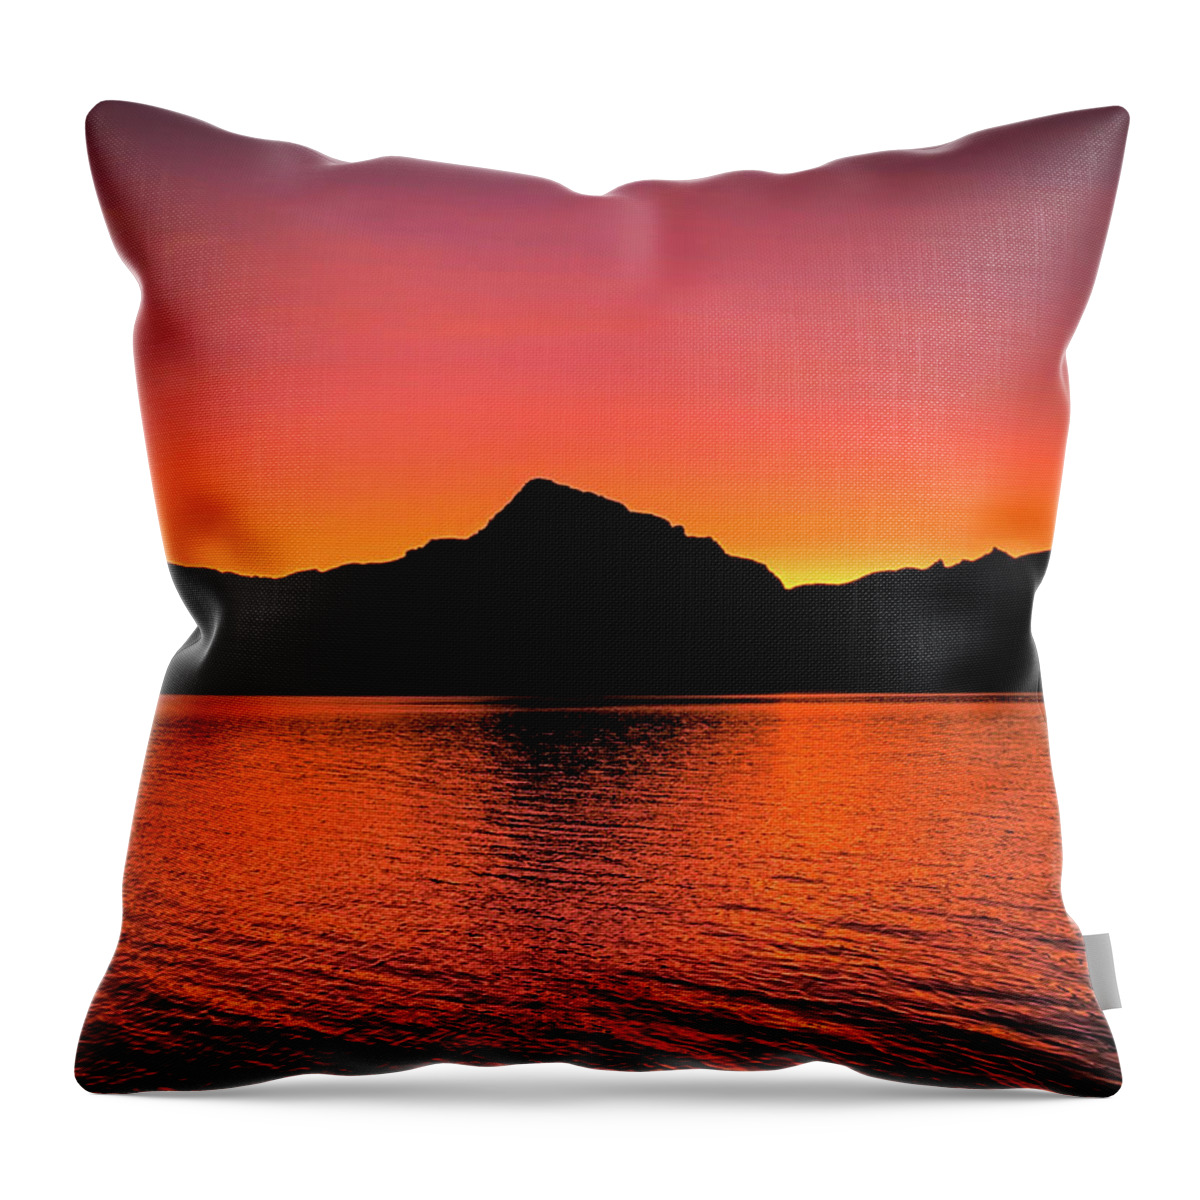 Lake Powell Throw Pillow featuring the photograph Romantic Powell Sunset by Bradley Morris